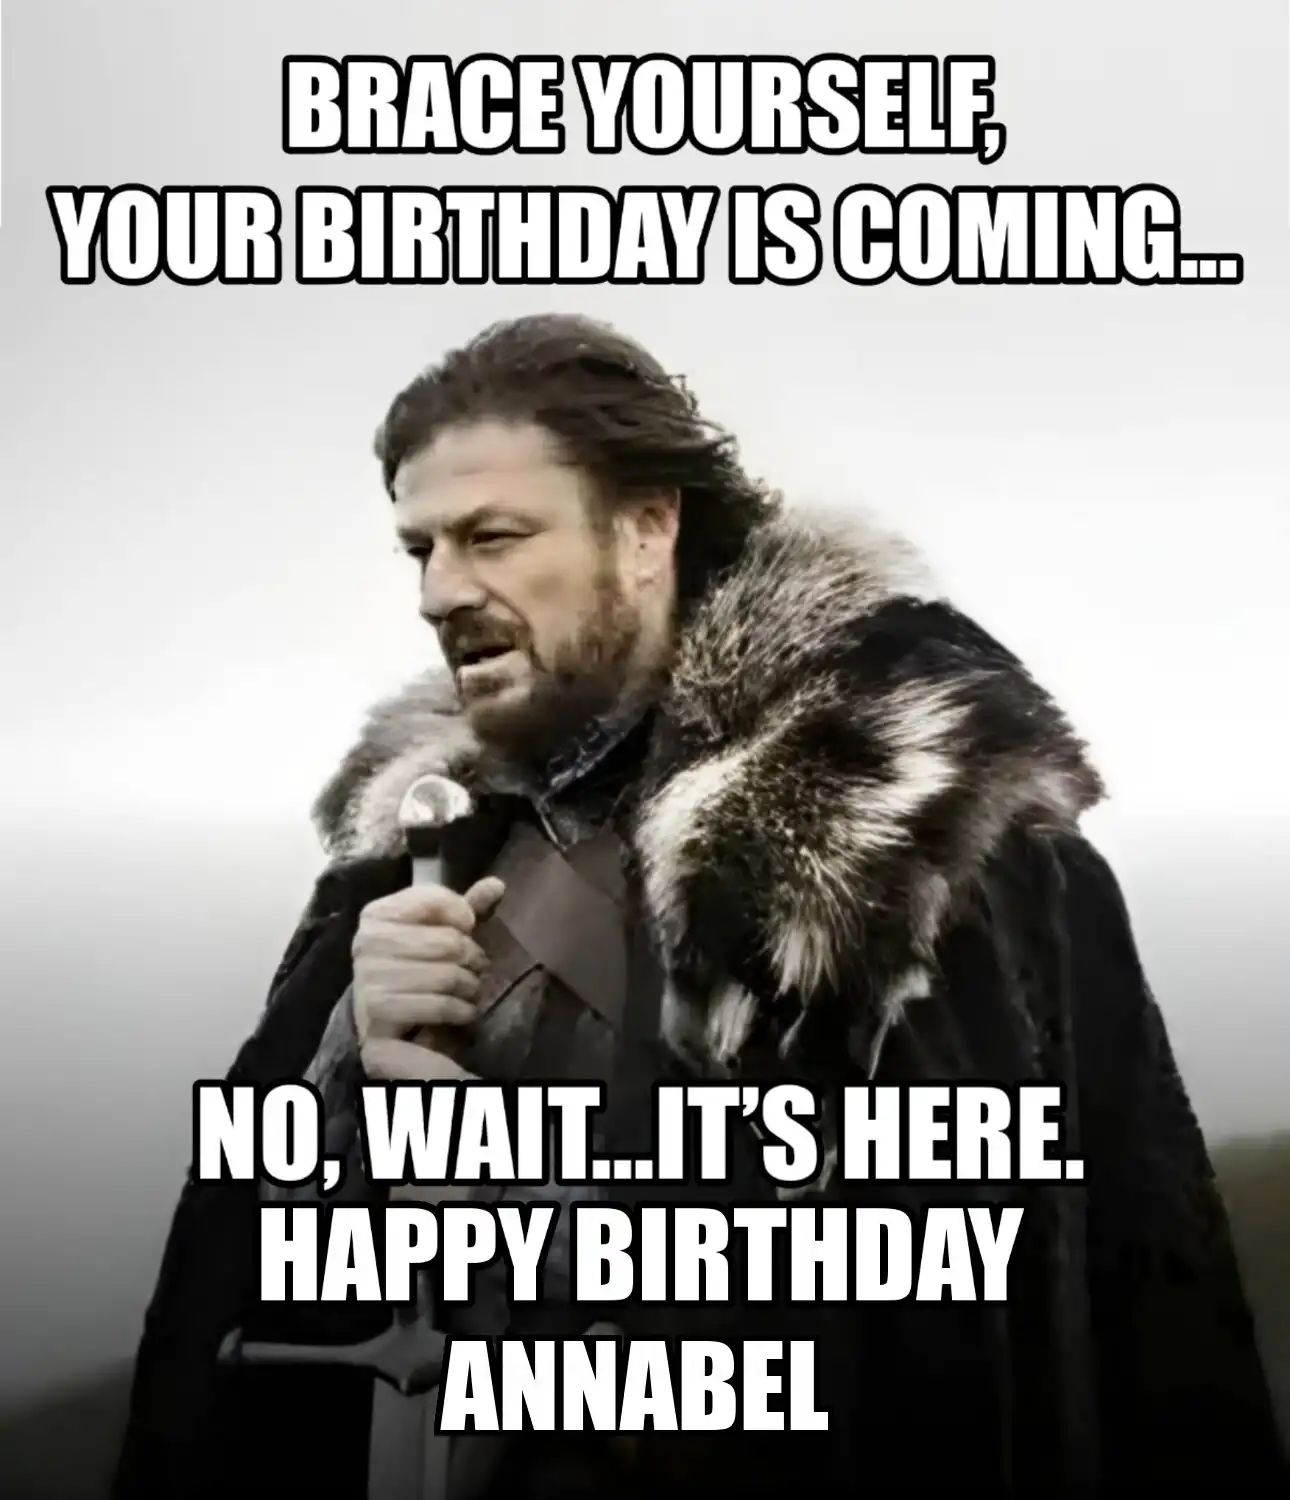 Happy Birthday Annabel Brace Yourself Your Birthday Is Coming Meme